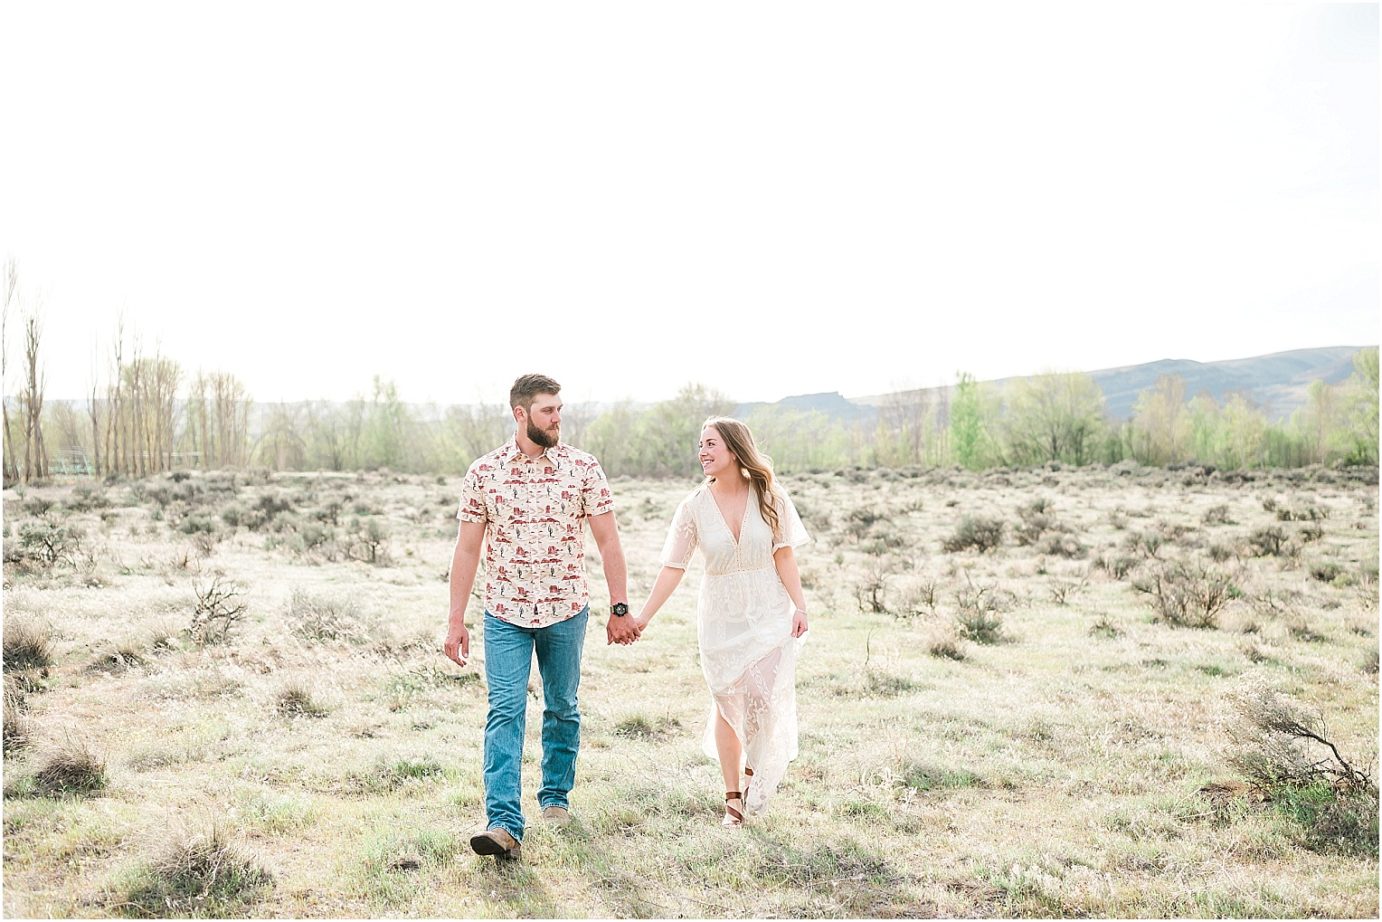 eastern washington engagement session PNW photographer Travis and arianna couple walking through a field